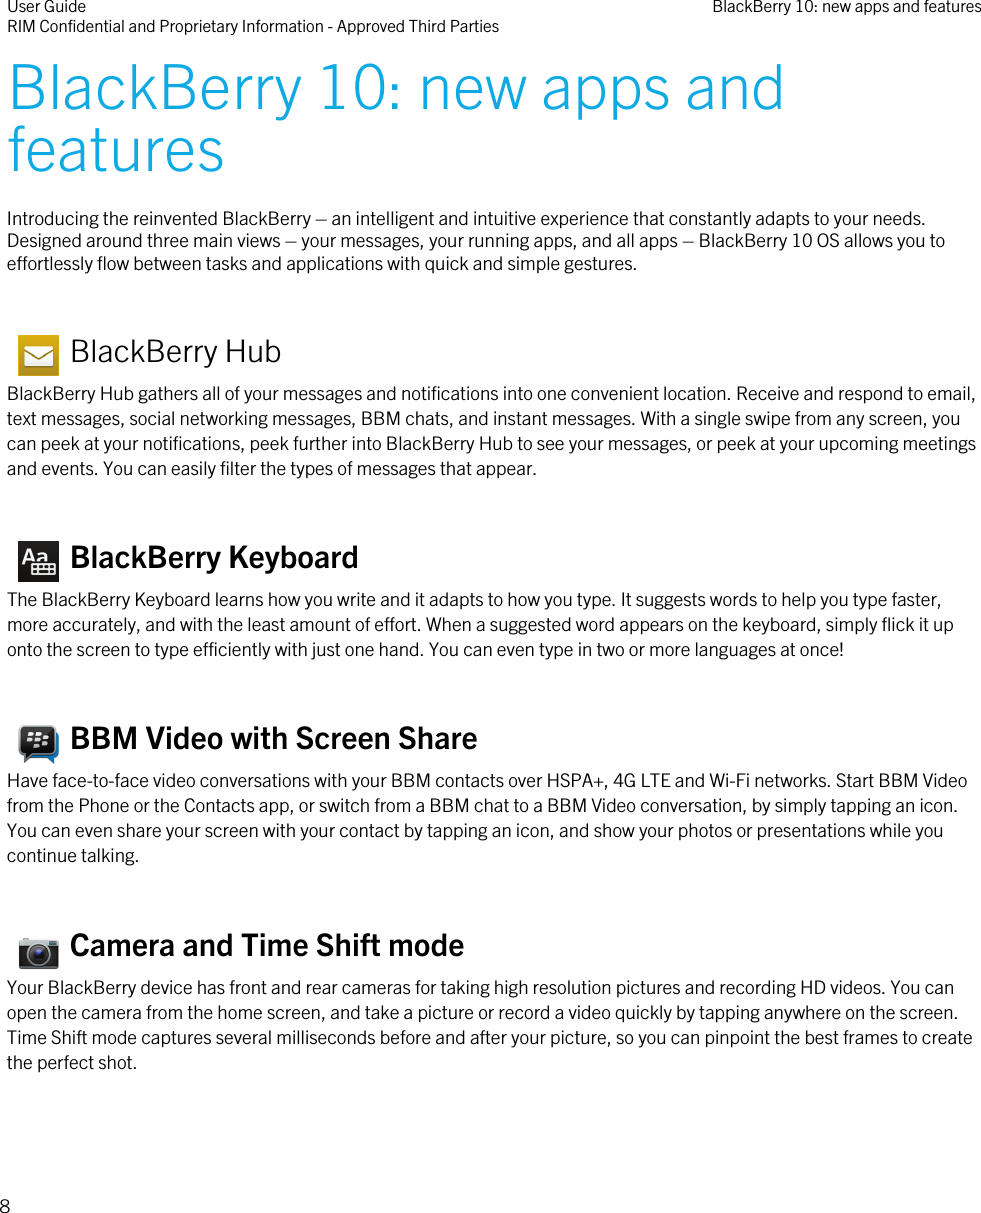 BlackBerry 10: new apps andfeaturesIntroducing the reinvented BlackBerry – an intelligent and intuitive experience that constantly adapts to your needs.Designed around three main views – your messages, your running apps, and all apps – BlackBerry 10 OS allows you toeffortlessly flow between tasks and applications with quick and simple gestures.   BlackBerry HubBlackBerry Hub gathers all of your messages and notifications into one convenient location. Receive and respond to email,text messages, social networking messages, BBM chats, and instant messages. With a single swipe from any screen, youcan peek at your notifications, peek further into BlackBerry Hub to see your messages, or peek at your upcoming meetingsand events. You can easily filter the types of messages that appear.   BlackBerry KeyboardThe BlackBerry Keyboard learns how you write and it adapts to how you type. It suggests words to help you type faster,more accurately, and with the least amount of effort. When a suggested word appears on the keyboard, simply flick it uponto the screen to type efficiently with just one hand. You can even type in two or more languages at once!   BBM Video with Screen ShareHave face-to-face video conversations with your BBM contacts over HSPA+, 4G LTE and Wi-Fi networks. Start BBM Videofrom the Phone or the Contacts app, or switch from a BBM chat to a BBM Video conversation, by simply tapping an icon.You can even share your screen with your contact by tapping an icon, and show your photos or presentations while youcontinue talking.   Camera and Time Shift modeYour BlackBerry device has front and rear cameras for taking high resolution pictures and recording HD videos. You canopen the camera from the home screen, and take a picture or record a video quickly by tapping anywhere on the screen.Time Shift mode captures several milliseconds before and after your picture, so you can pinpoint the best frames to createthe perfect shot.User GuideRIM Confidential and Proprietary Information - Approved Third Parties BlackBerry 10: new apps and features8